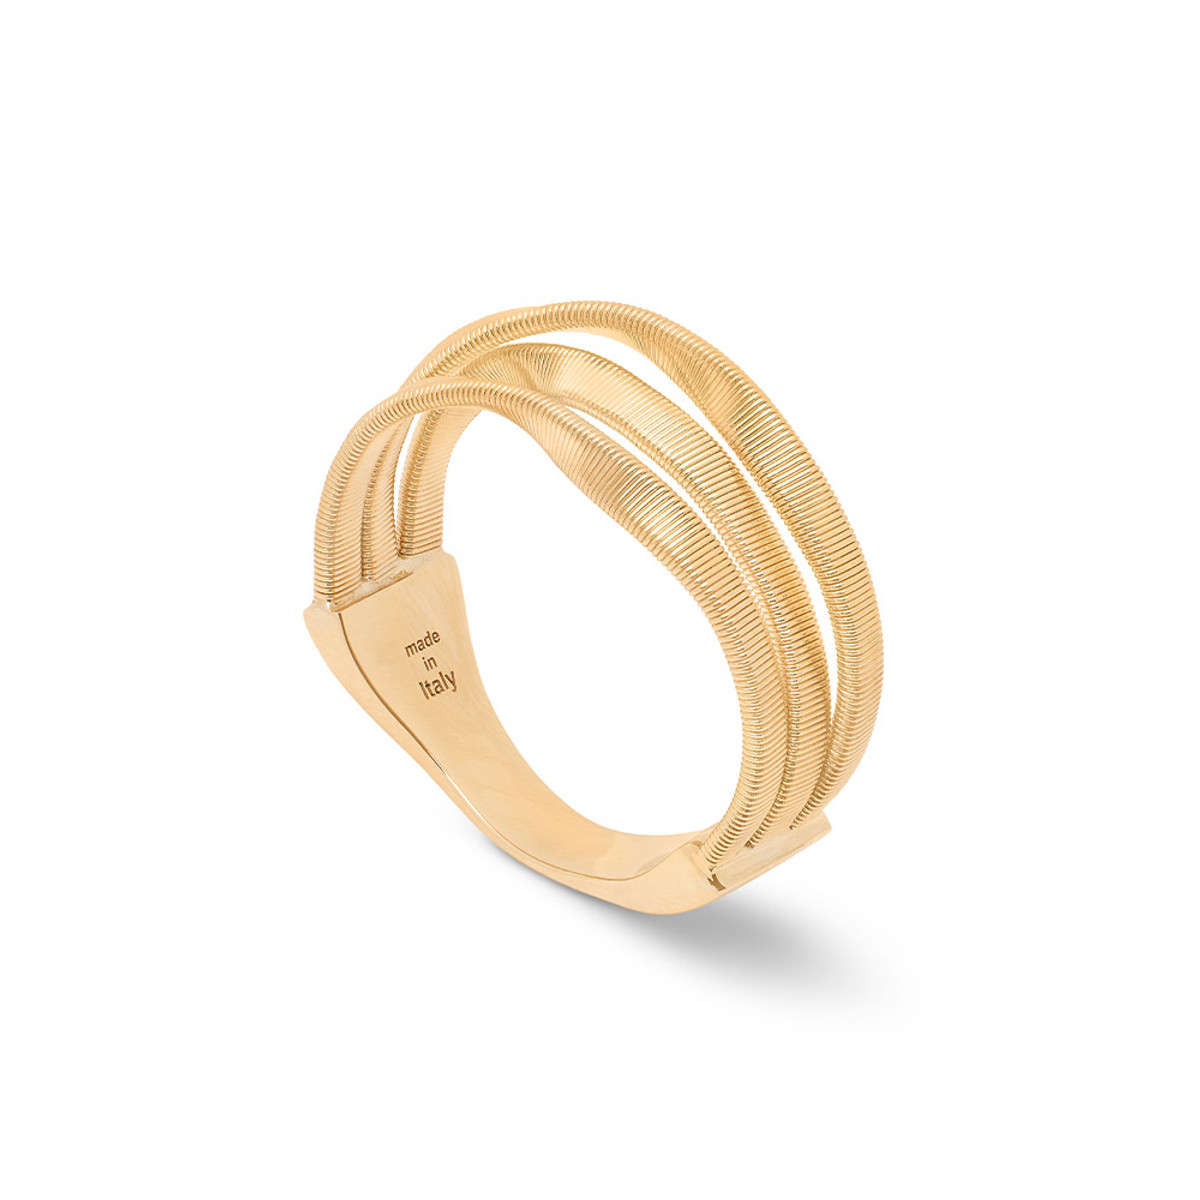 Marco Bicego Marrakech Collection 18K Yellow Gold 3 Row Hand Twisted Ring-54243 Product Image